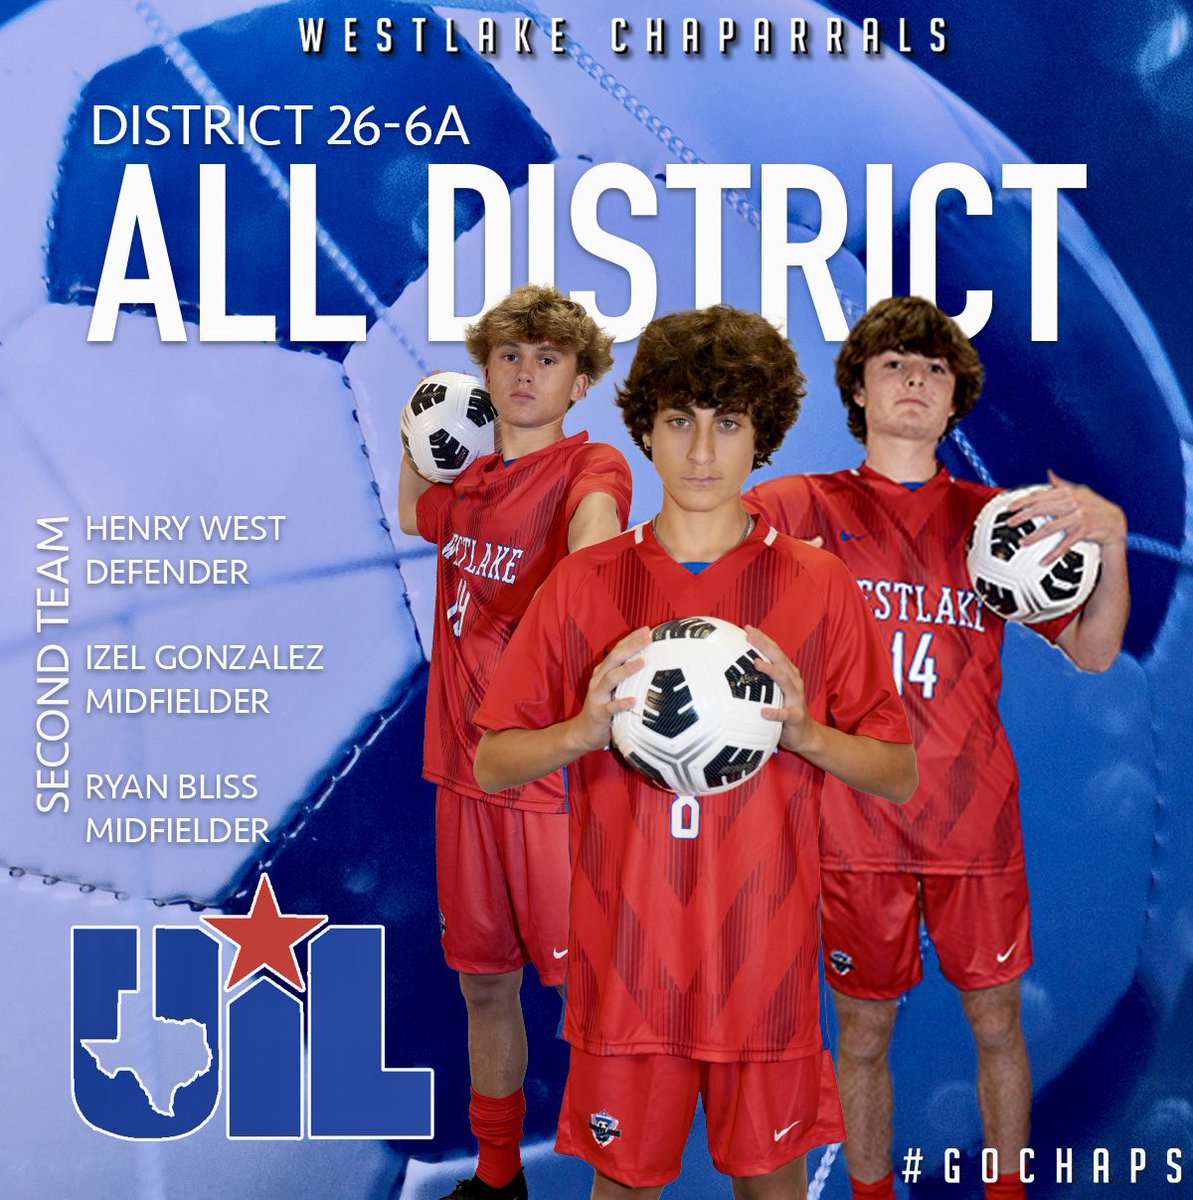 District honors continue for Men’s Soccer as we announce the 26-6A All-District 2nd Team. Shoutout to Henry West, Izel Gonzalez & Ryan Bliss. #GoChaps Henry West: Defender Izel Gonzalez: Midfielder Ryan Bliss: Midfielder